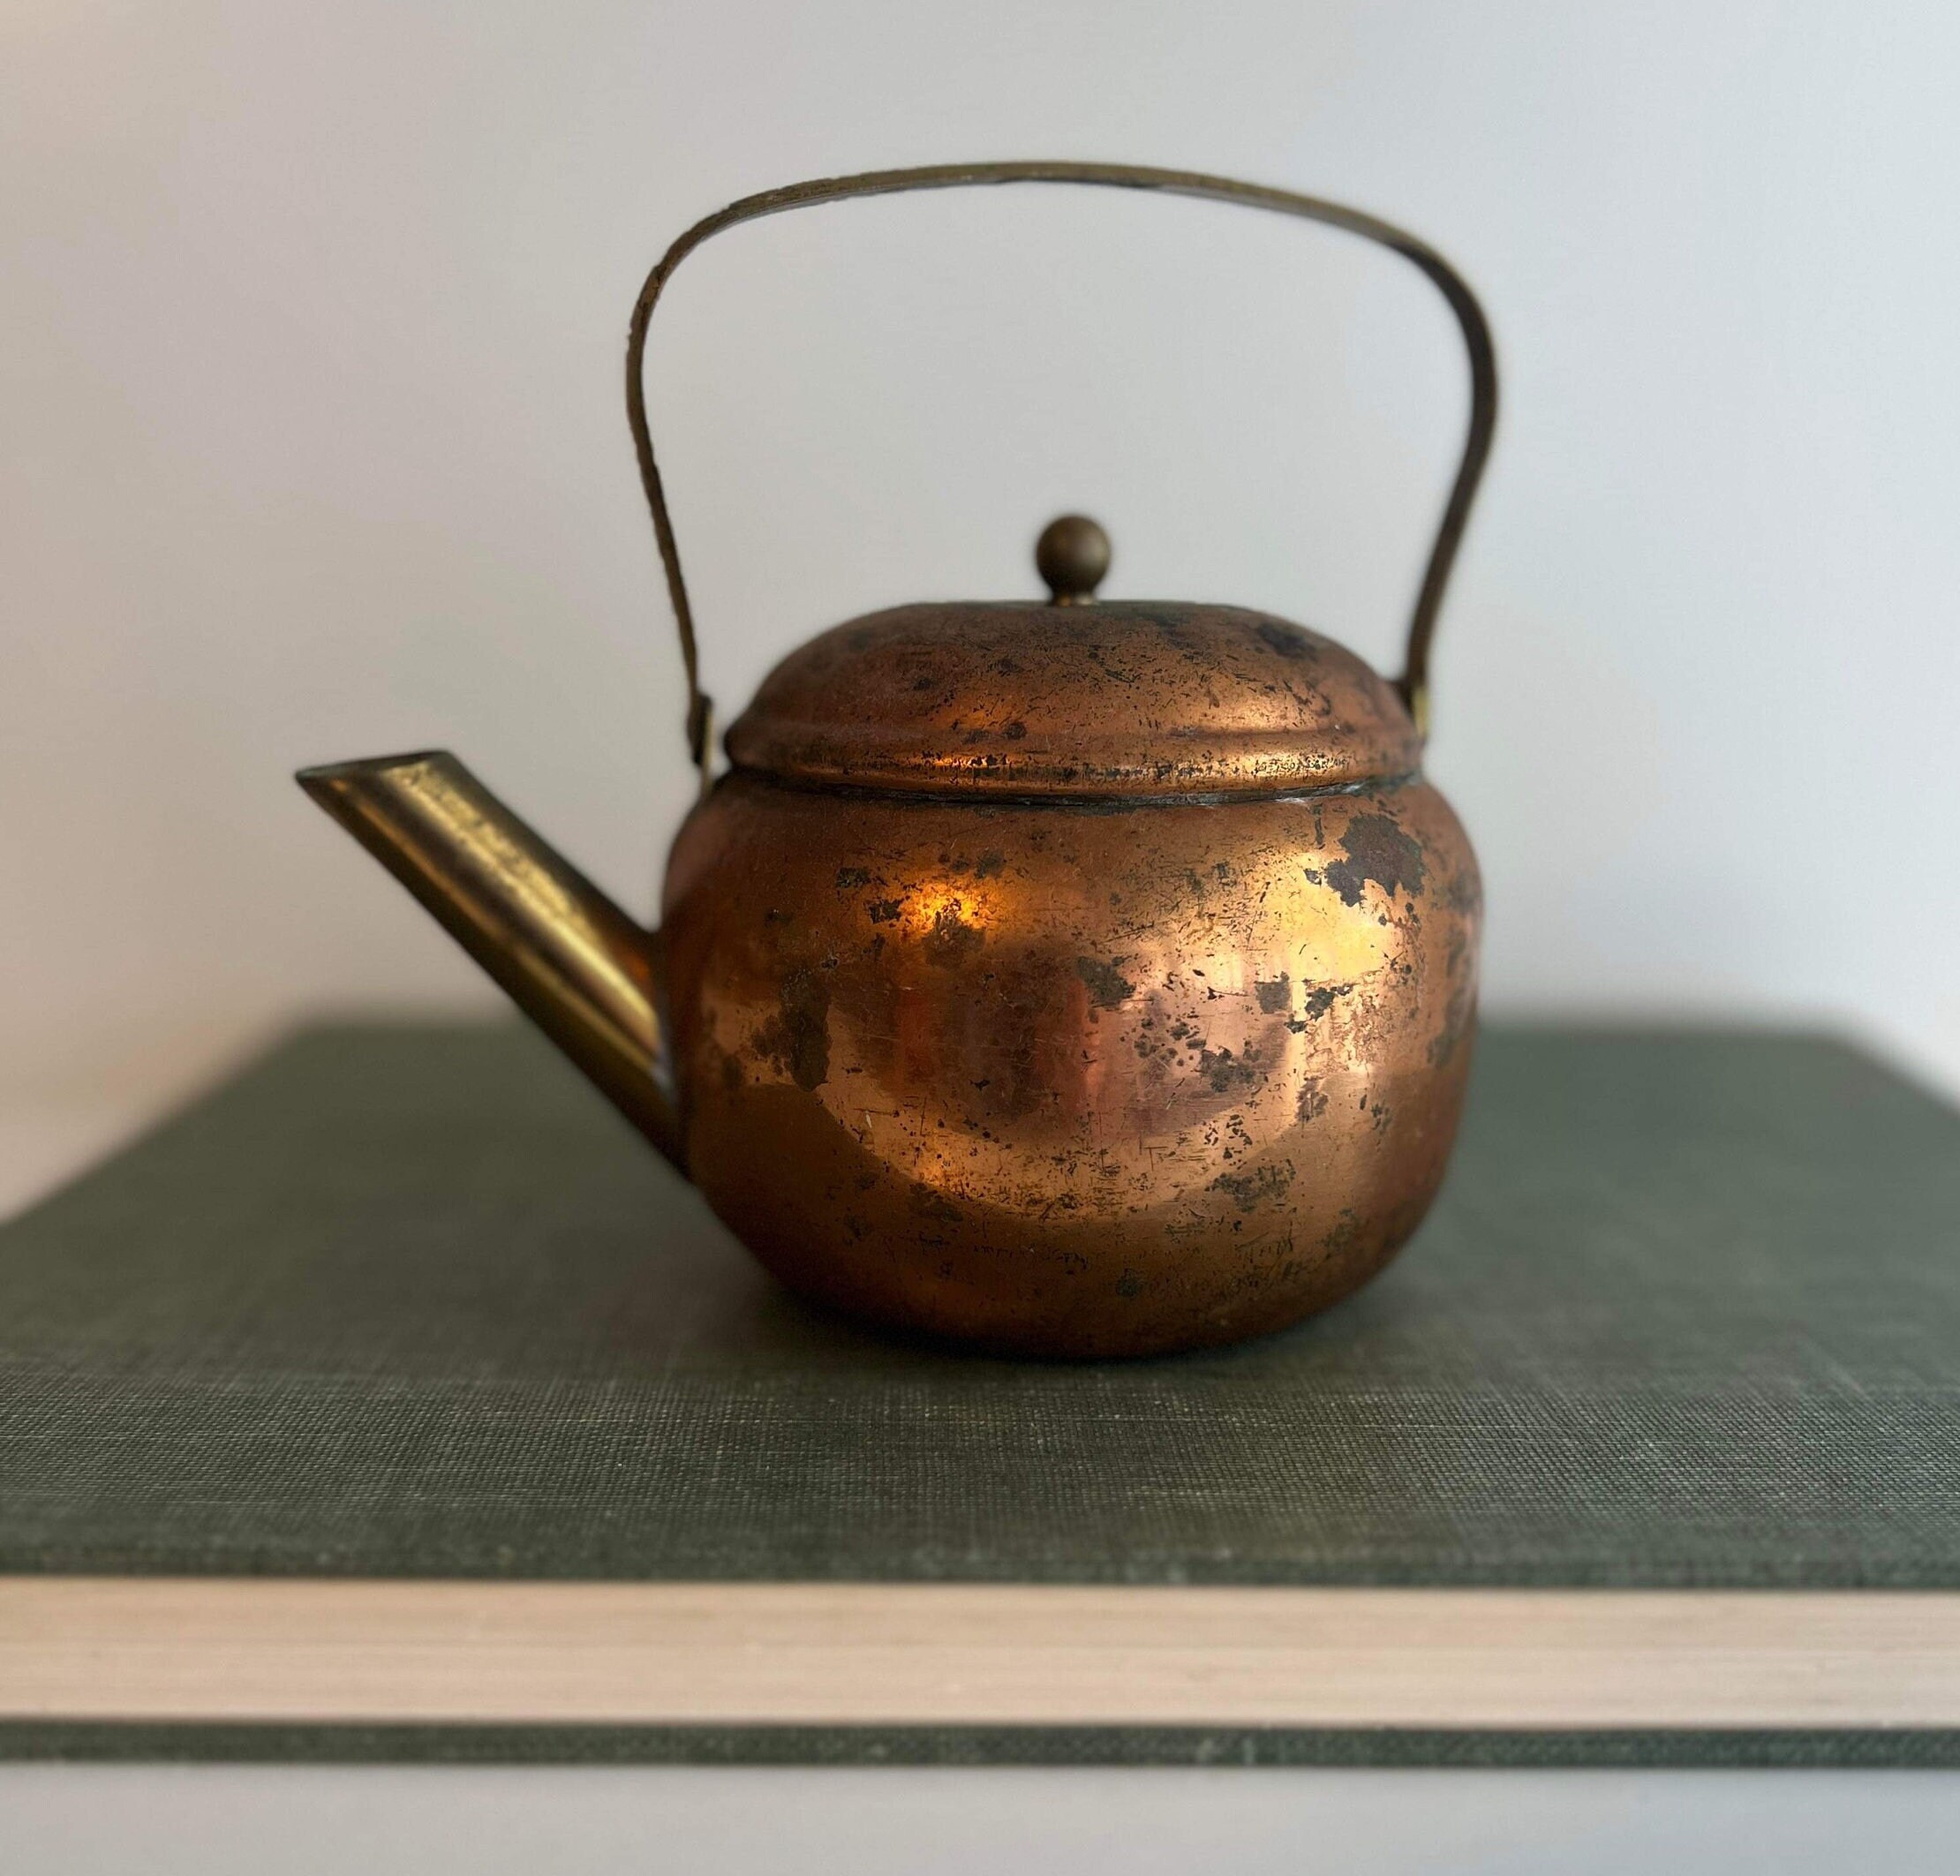 Vintage Small Copper Teapot With Wooden Handle and Knob on Lid. Swing  Handle. Compact Little Tea Kettle. Cute. 